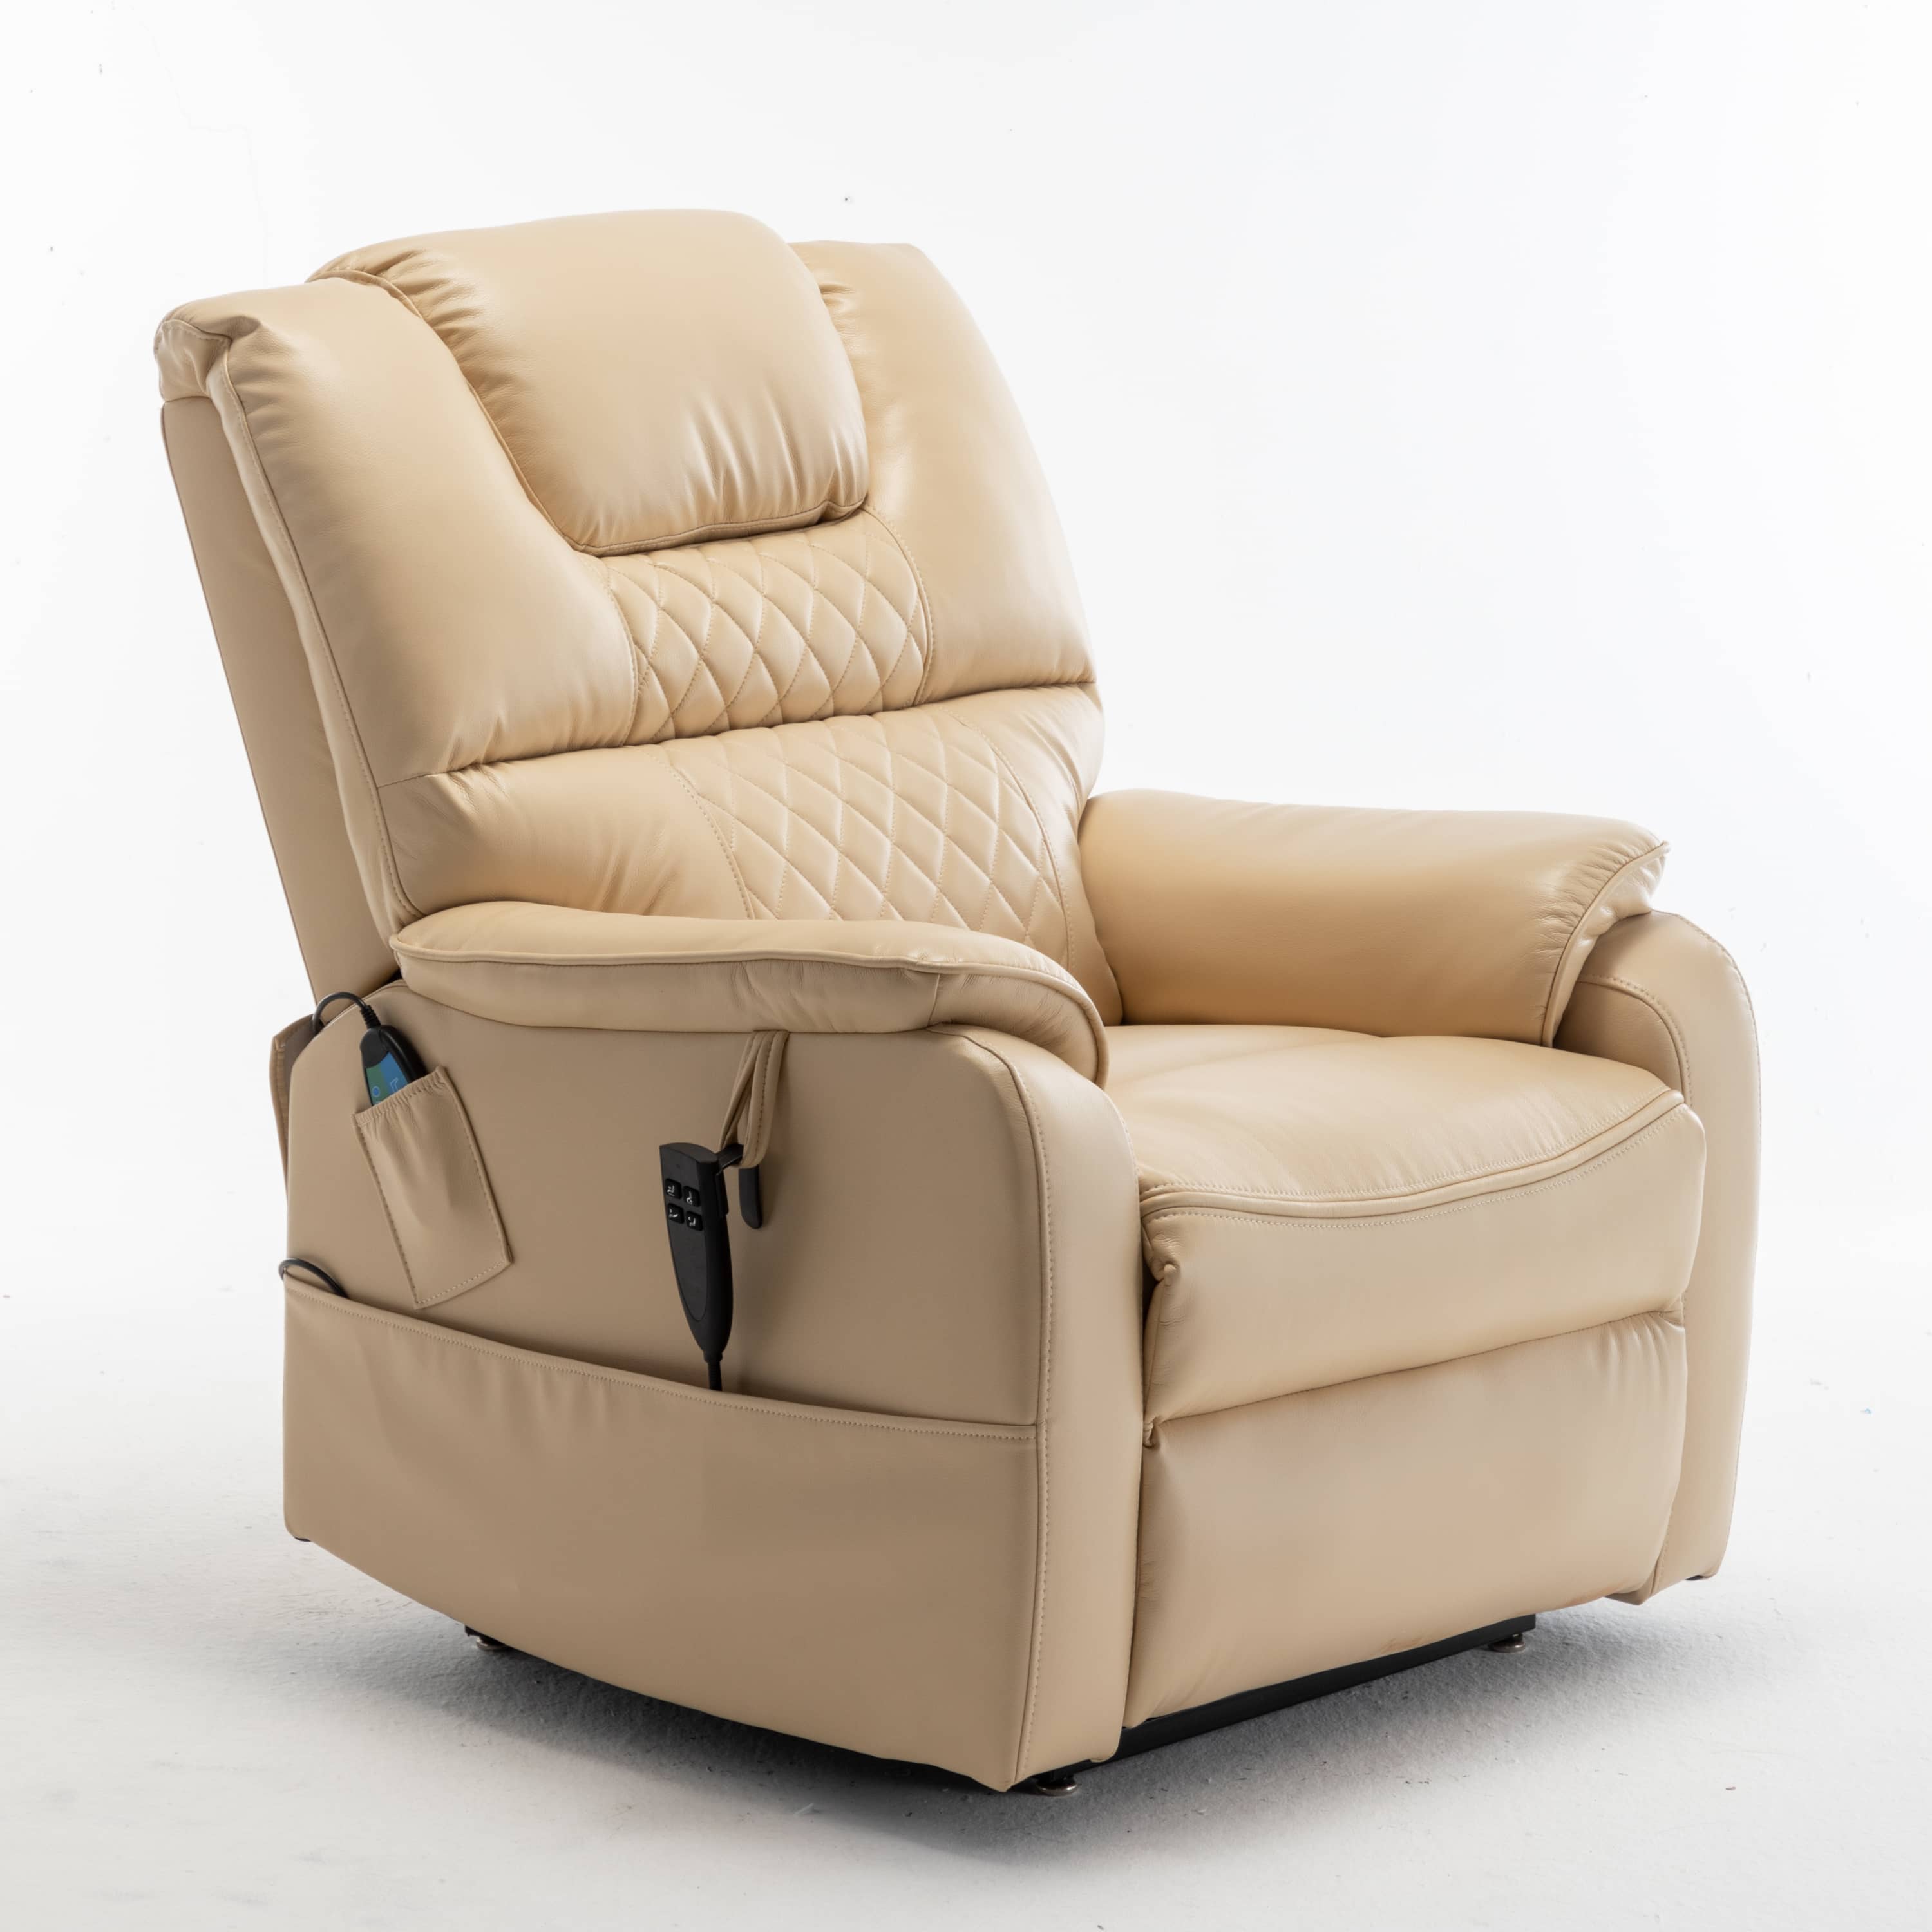 Extra Wide Lay Flat Power Lift Chair Recliner, Beige